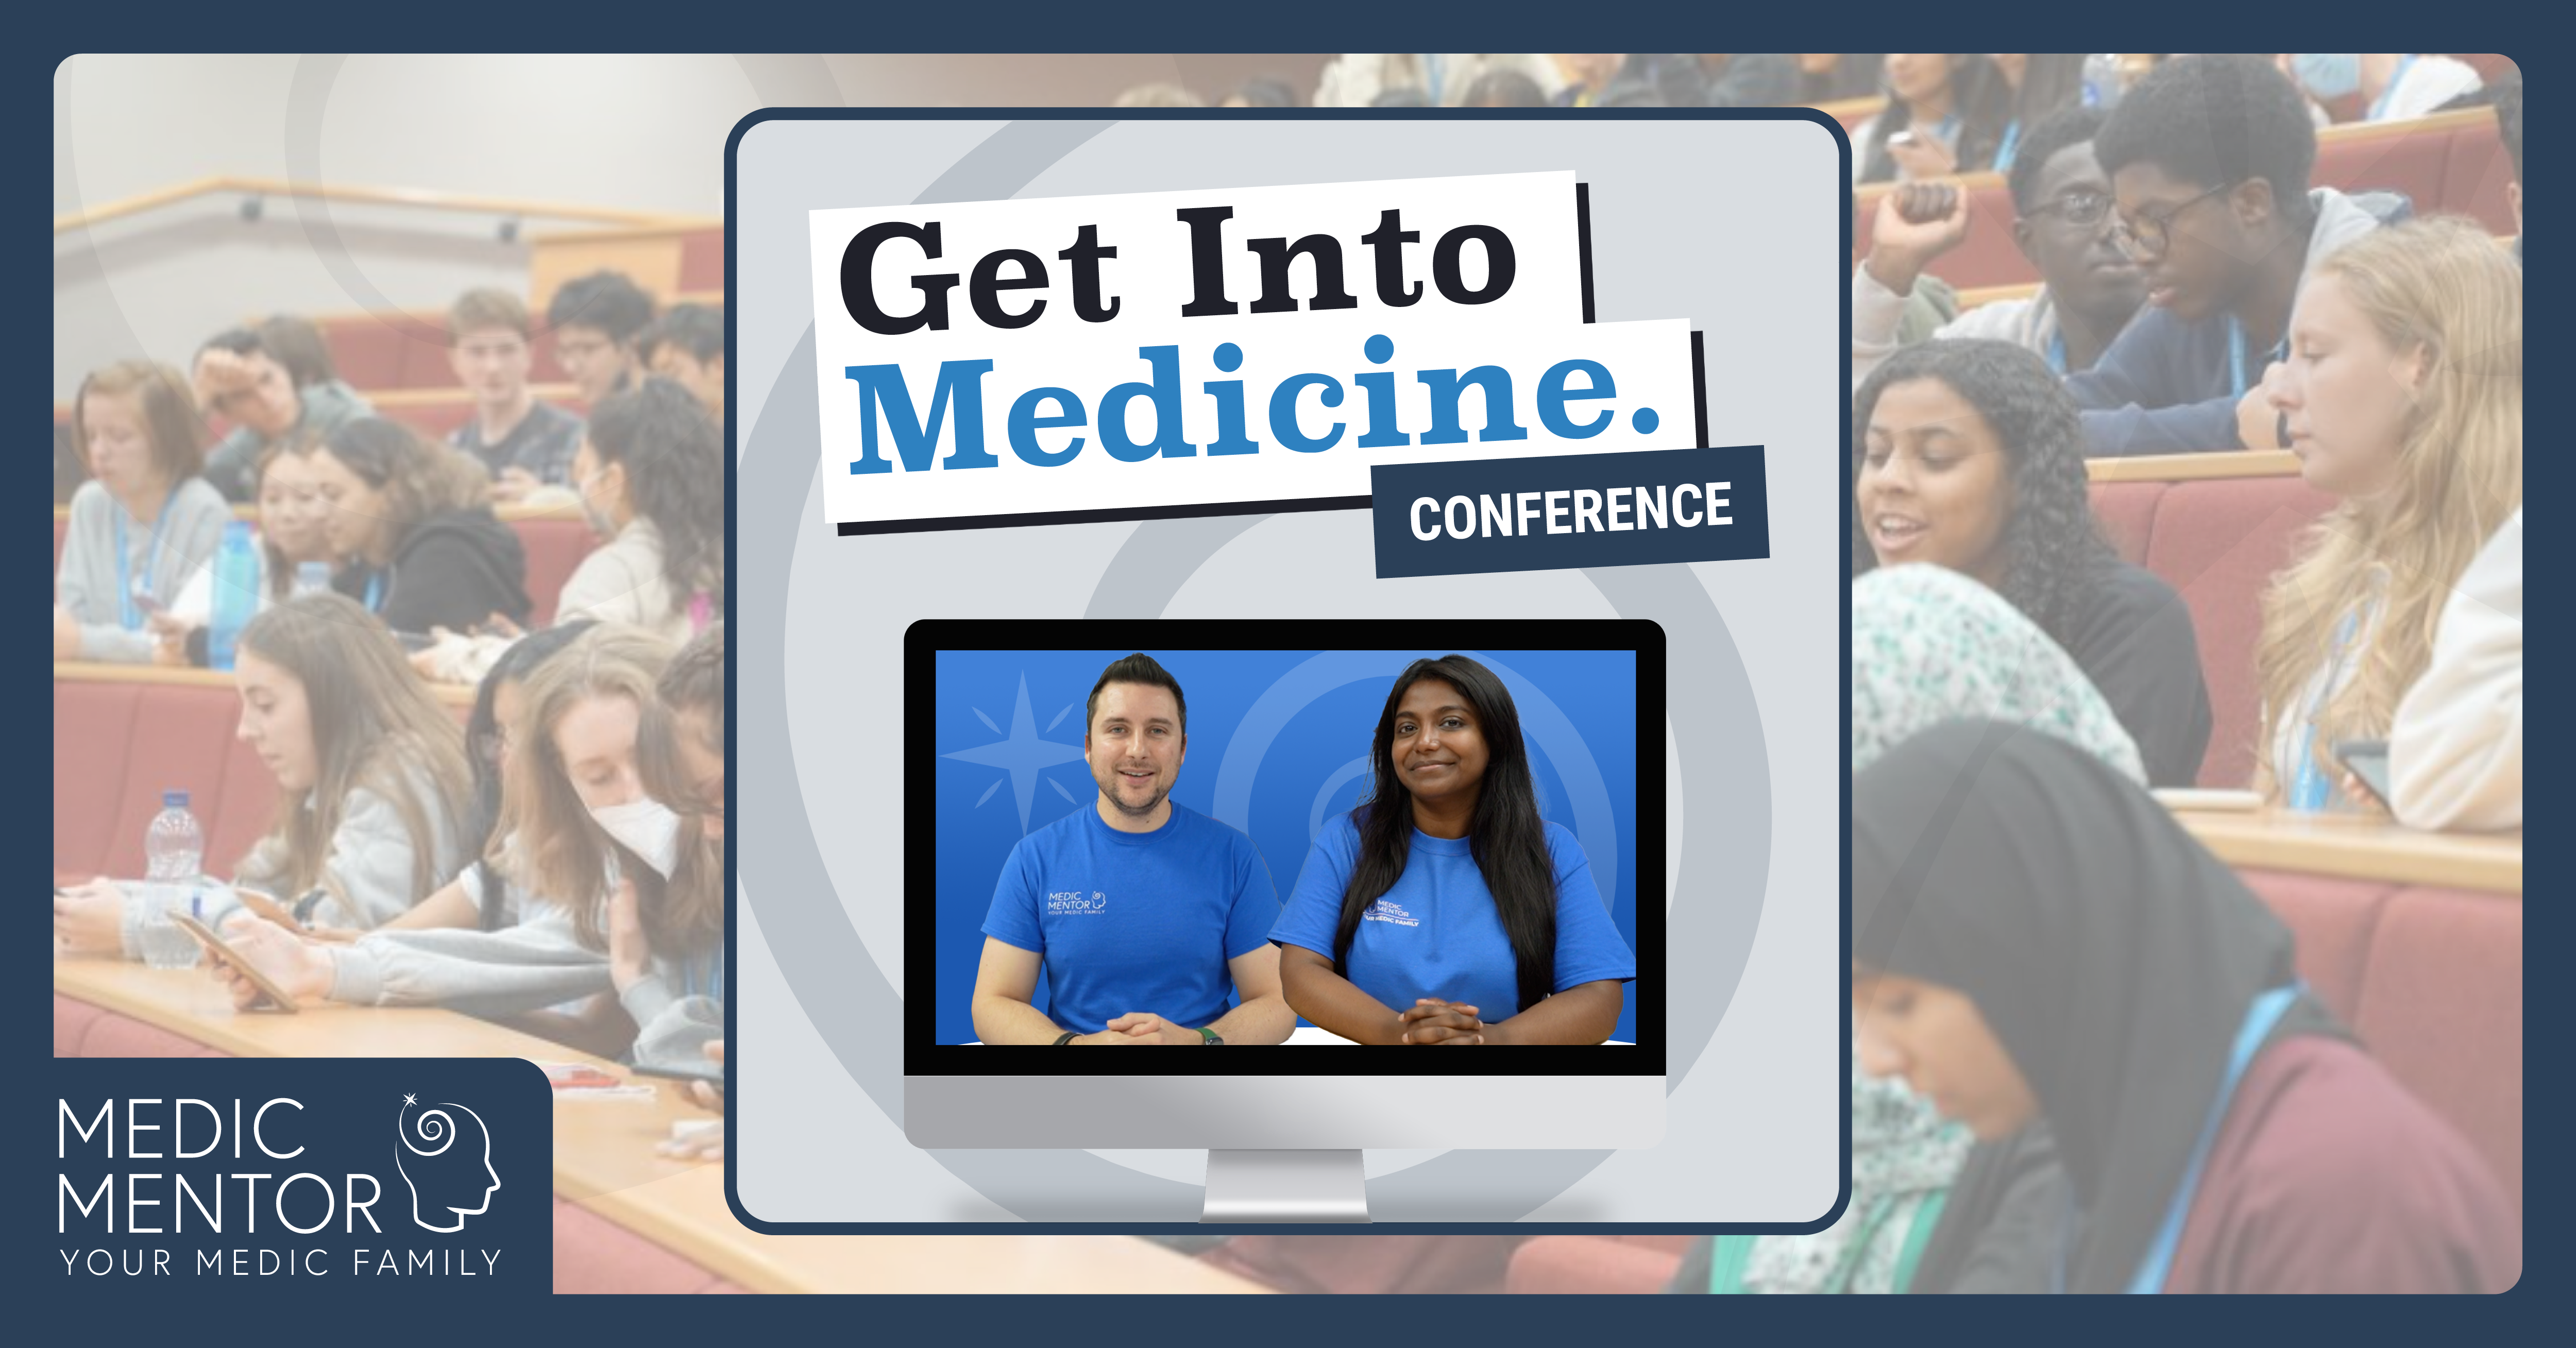 The Get Into Medicine Conference E-Learning